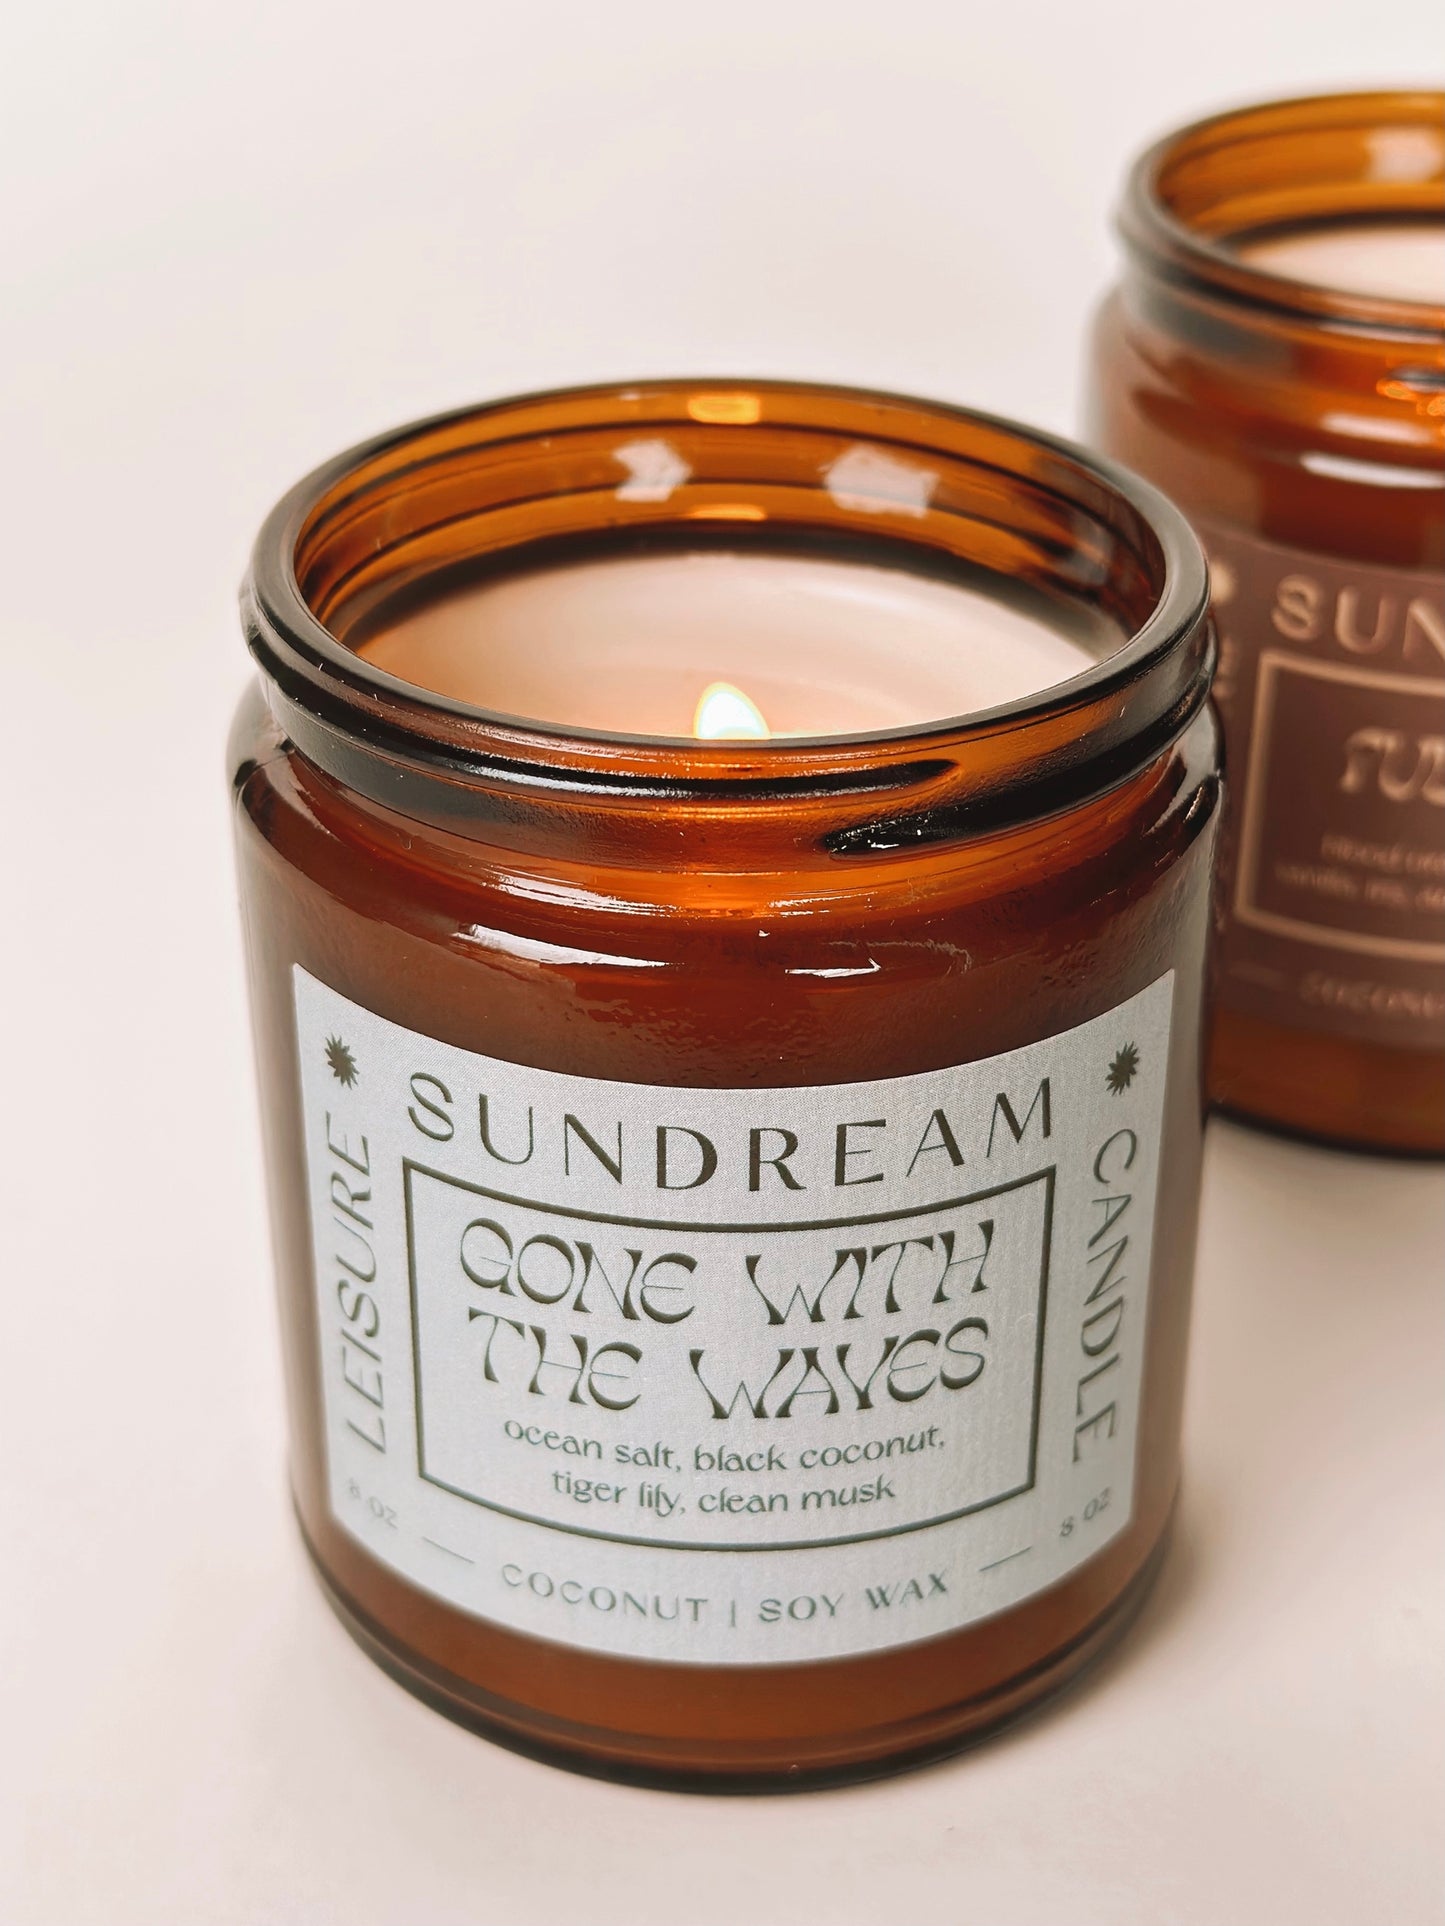 Hand poured Gone with the Waves candle by Sundream. With notes of ocean salt, black coconut, tiger lily, clean musk this balanced blend was created to inspire moments of relaxation & inspiration.